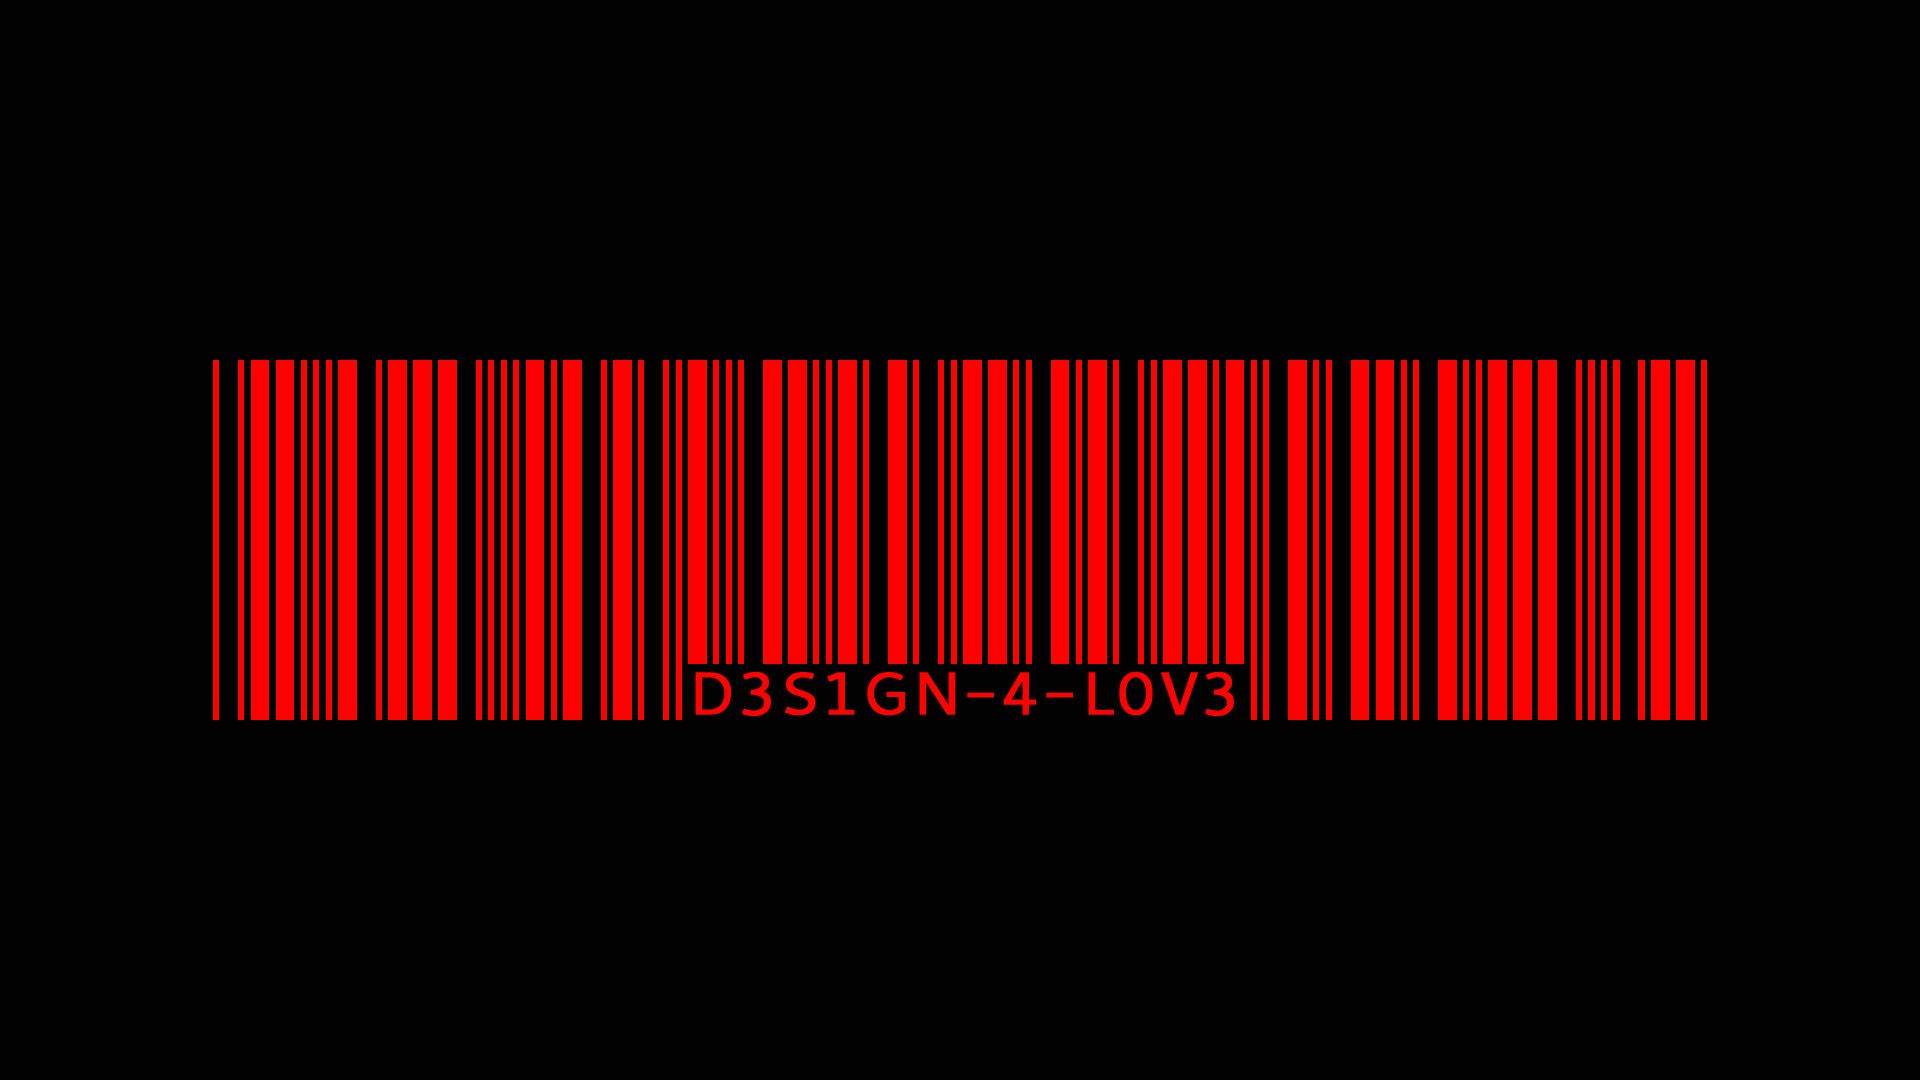 A red and black barcode with a unique pattern. Wallpaper